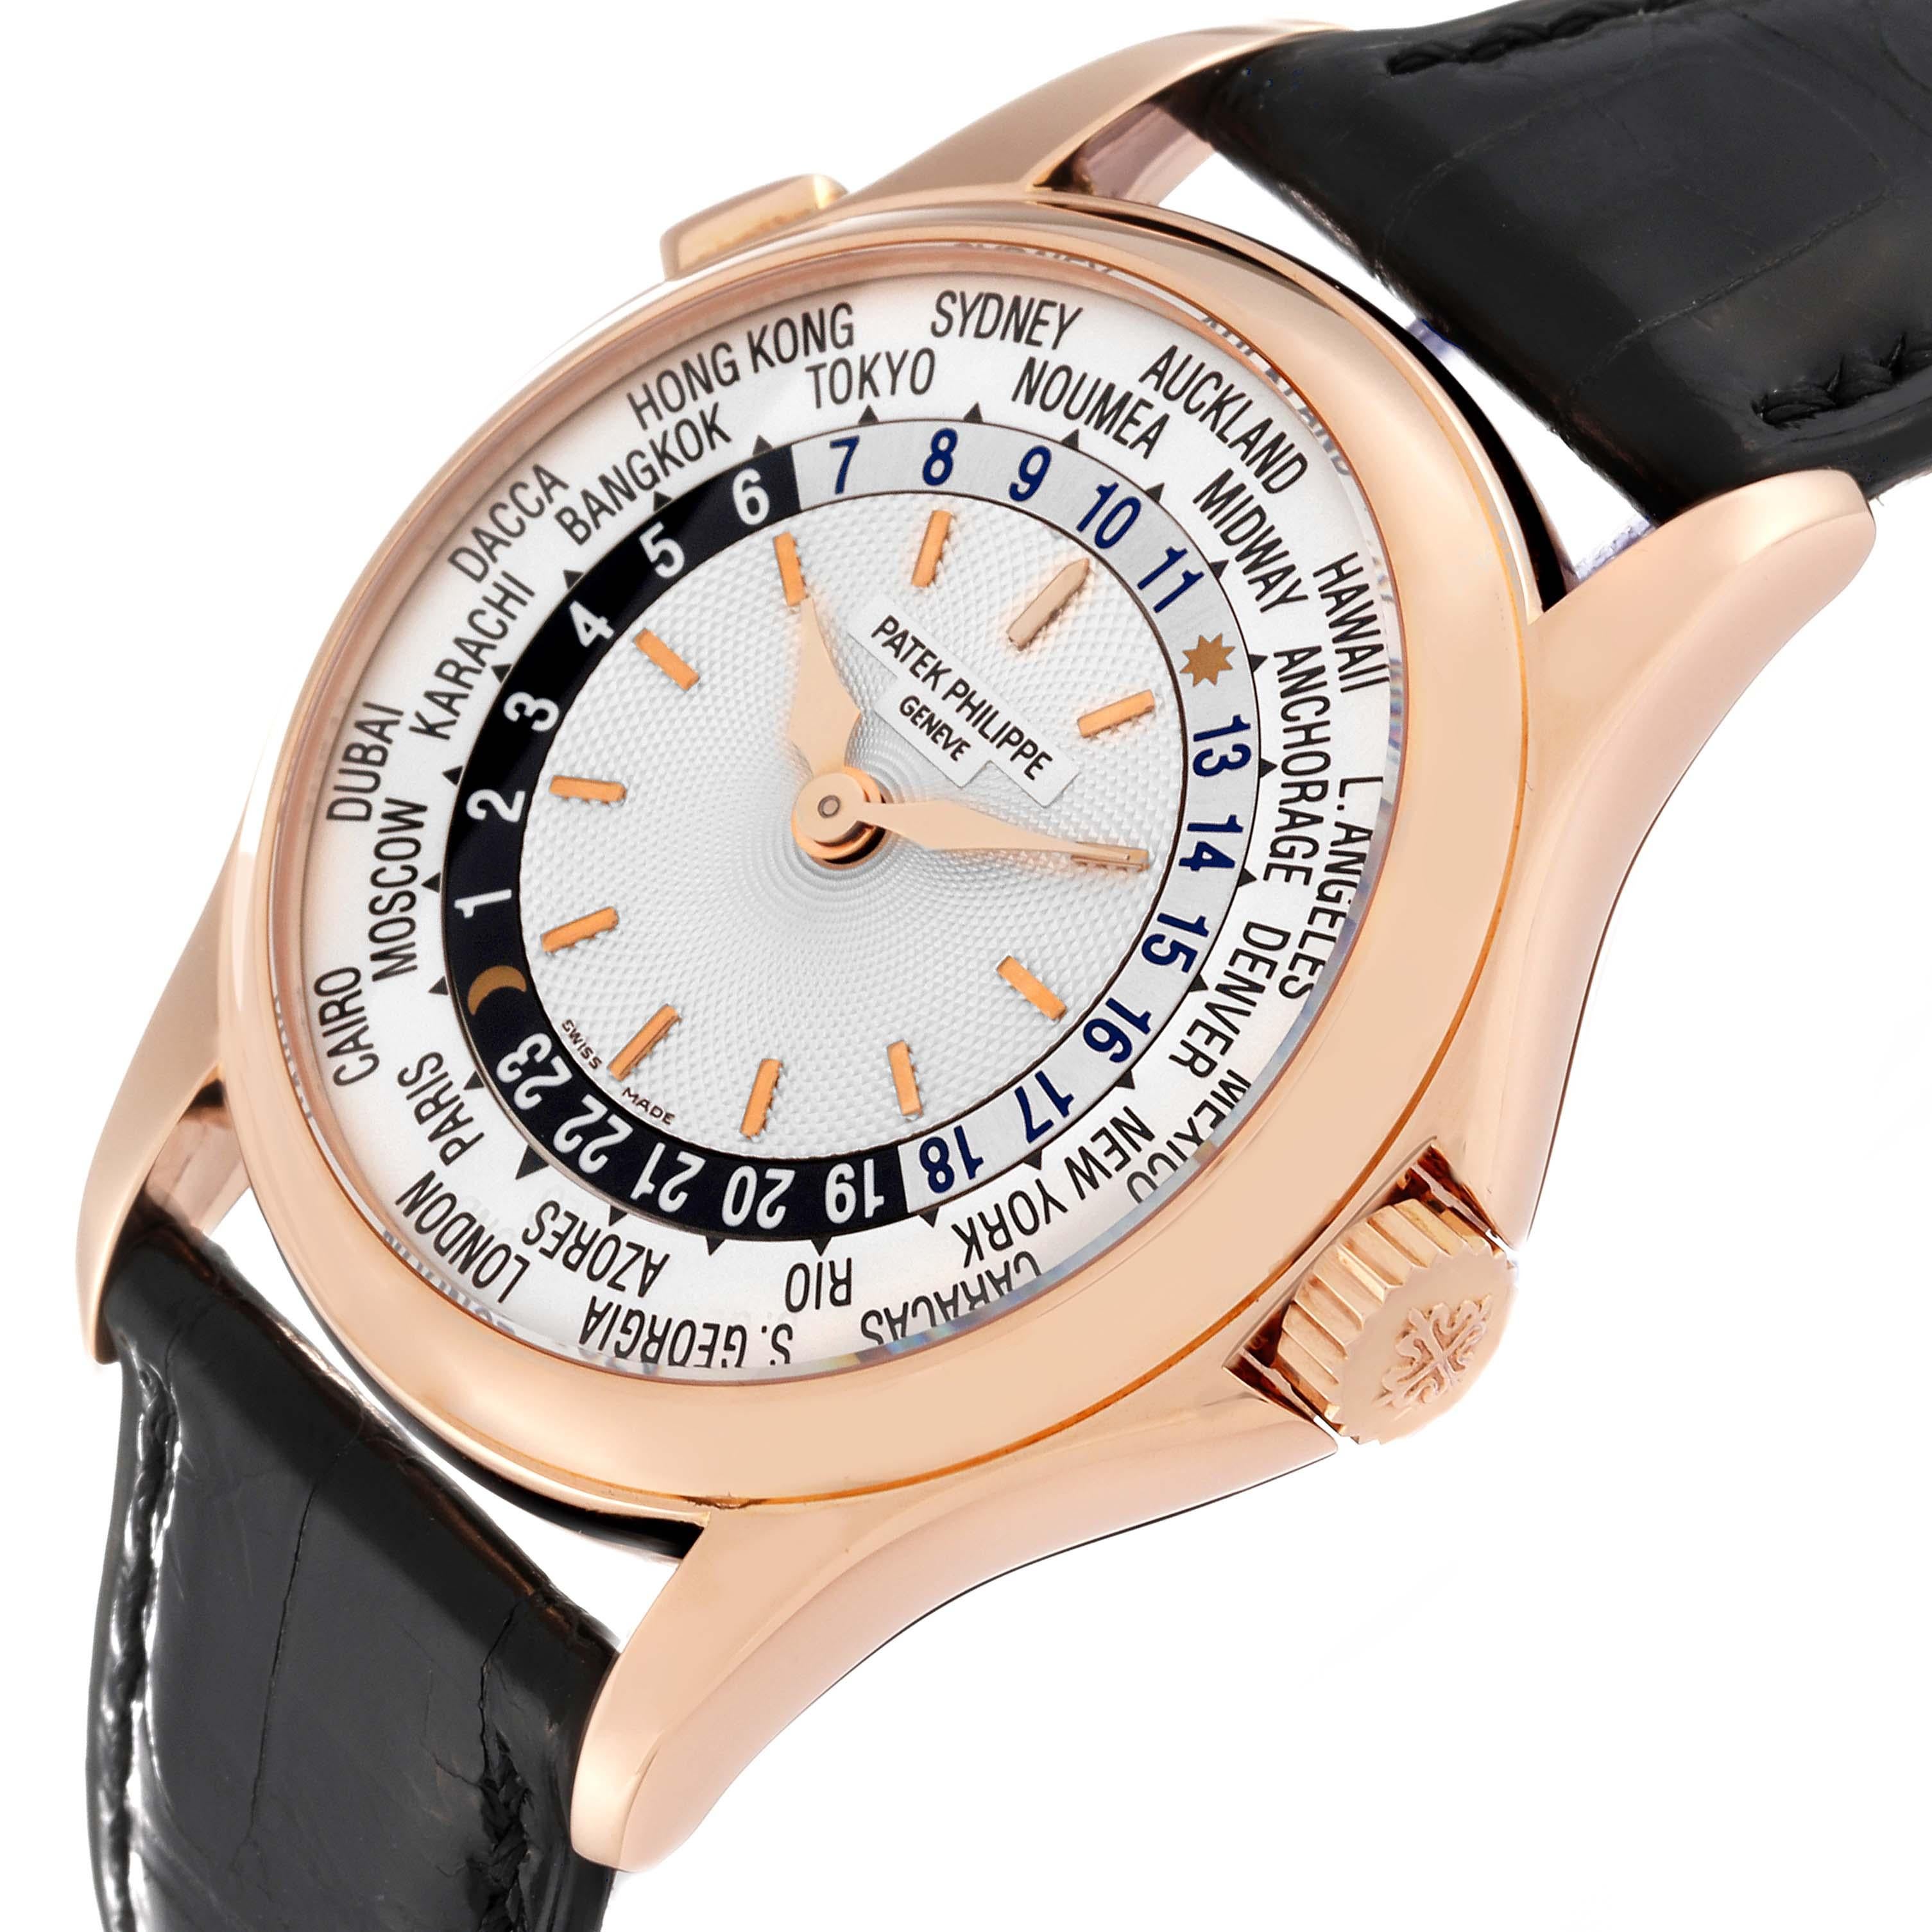  Patek Philippe World Time Automatic Silver Dial Rose Gold Mens Watch 5110 Pour hommes 